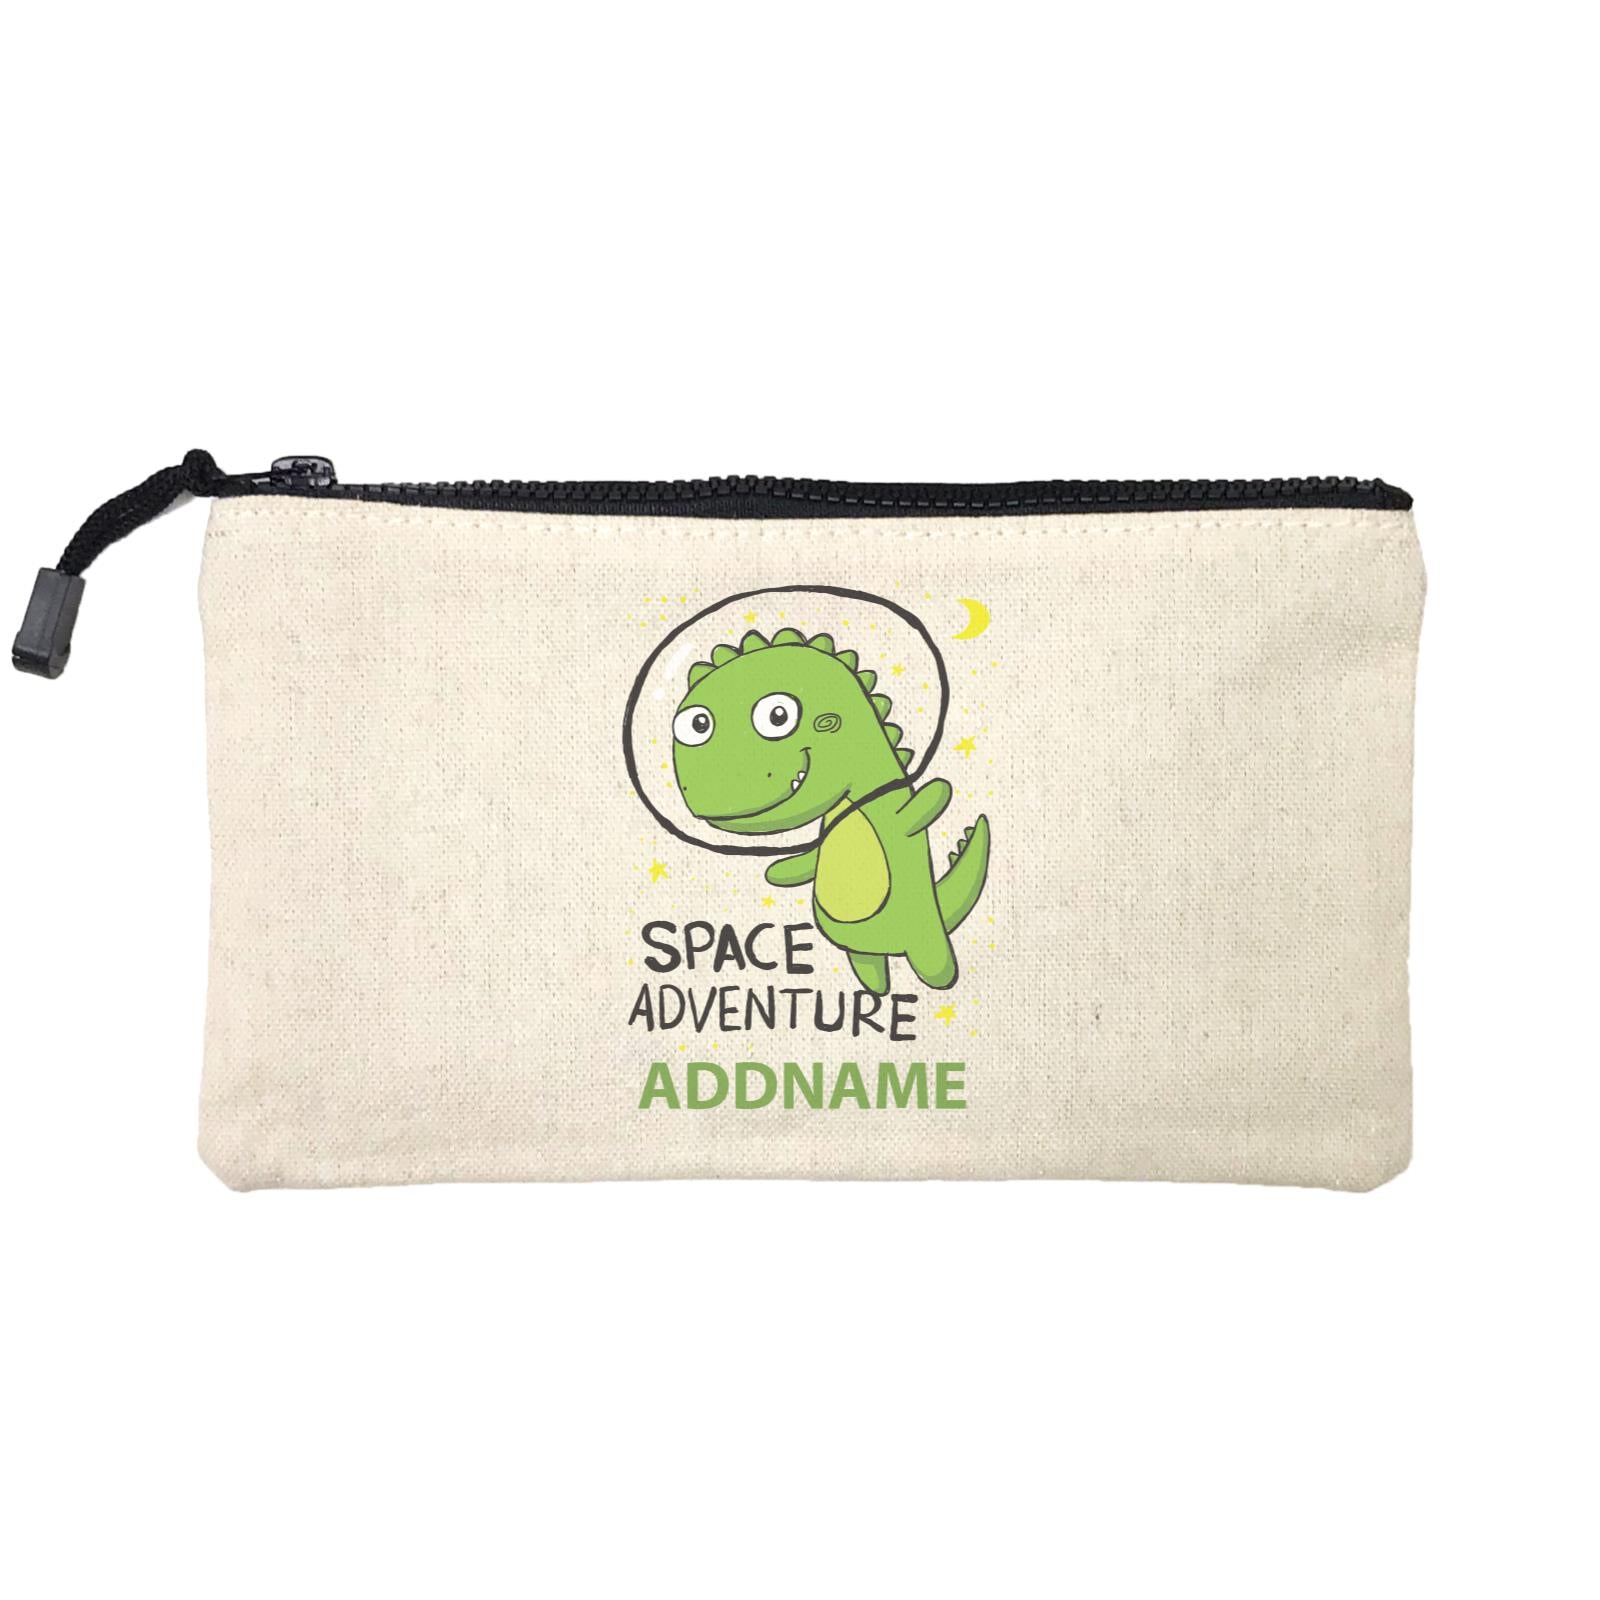 Cool Cute Dinosaur Space Adventure Addname Mini Accessories Stationery Pouch